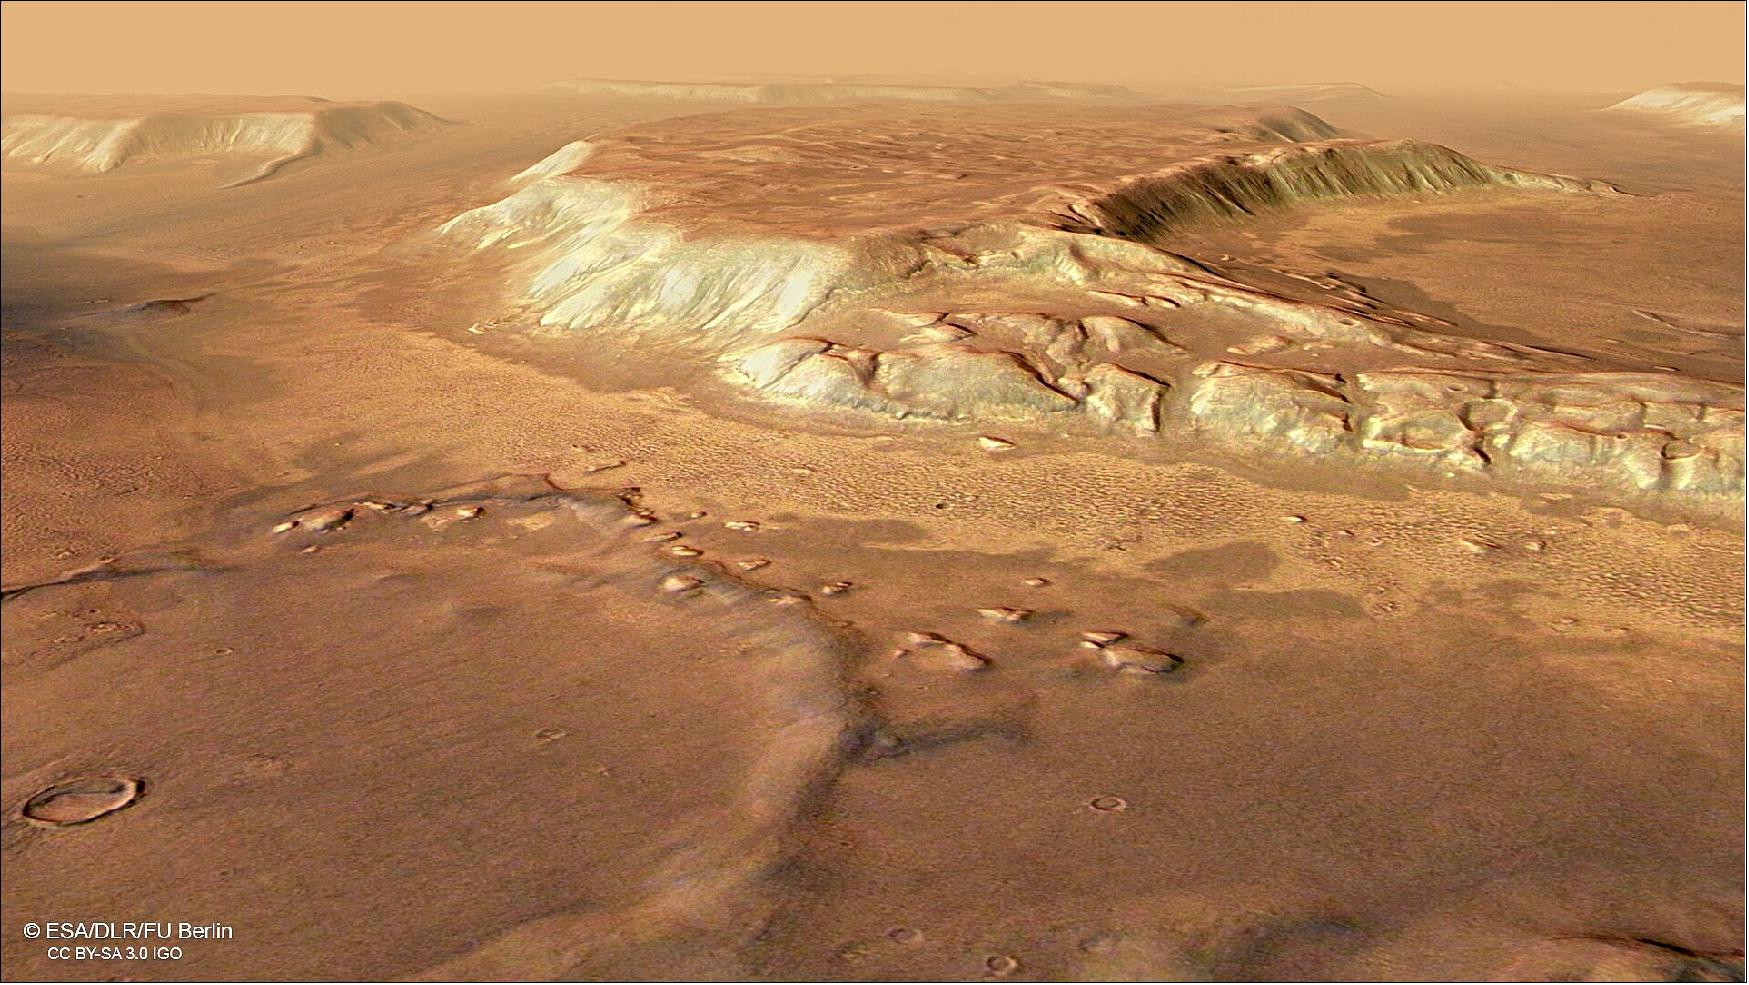 Figure 7: This image from ESA's Mars Express shows a region of Mars named Deuteronilus Mensae. This oblique perspective view was generated using a digital terrain model and Mars Express data gathered on 25 February 2018 during orbit 17913. The ground resolution is approximately 13 m/pixel and the images are centered at about 25.5ºE/44ºN. This image was created using data from the nadir and color channels of the High Resolution Stereo Camera (HRSC). The nadir channel is aligned perpendicular to the surface of Mars, as if looking straight down at the surface (image credit: ESA/DLR/FU Berlin, CC BY-SA 3.0 IGO)